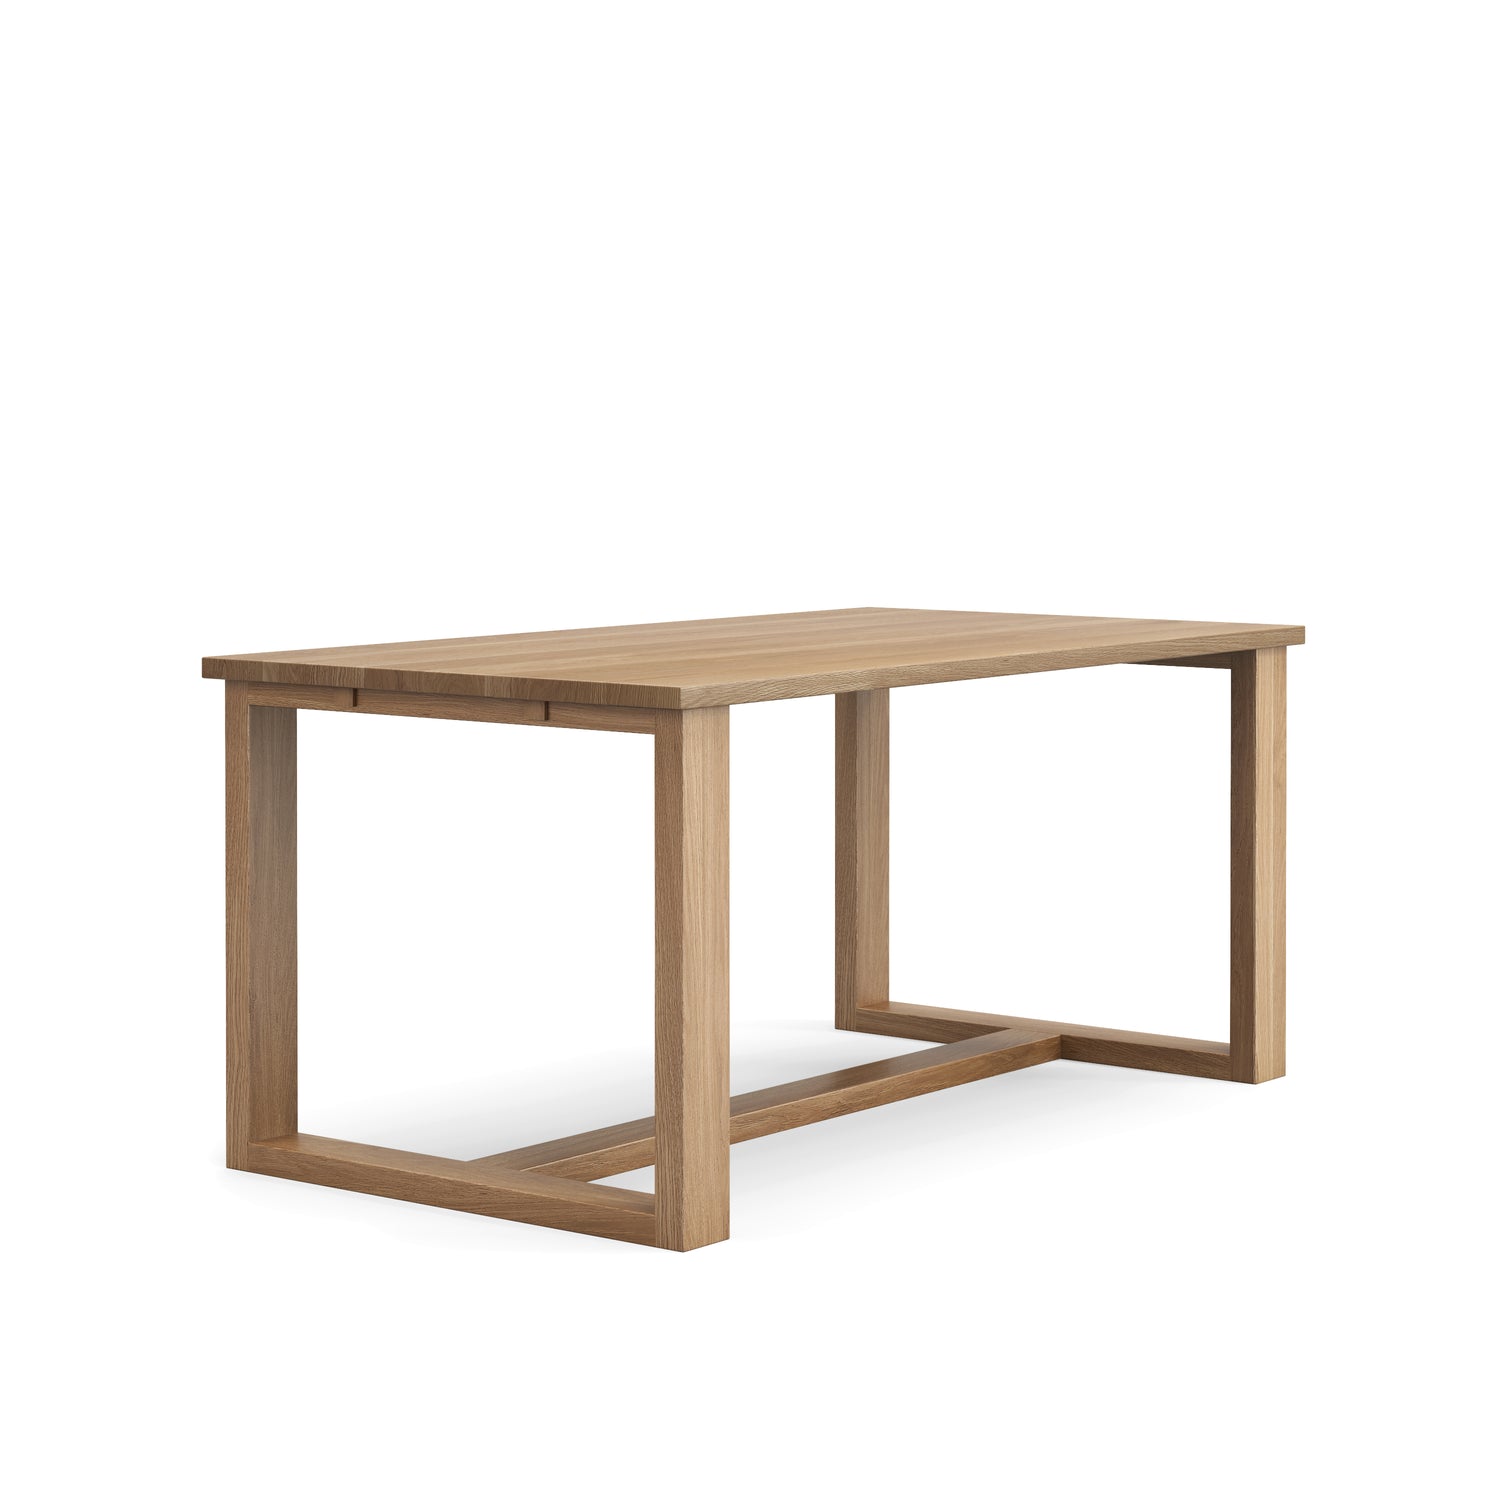 Arwin solid wood dinning table